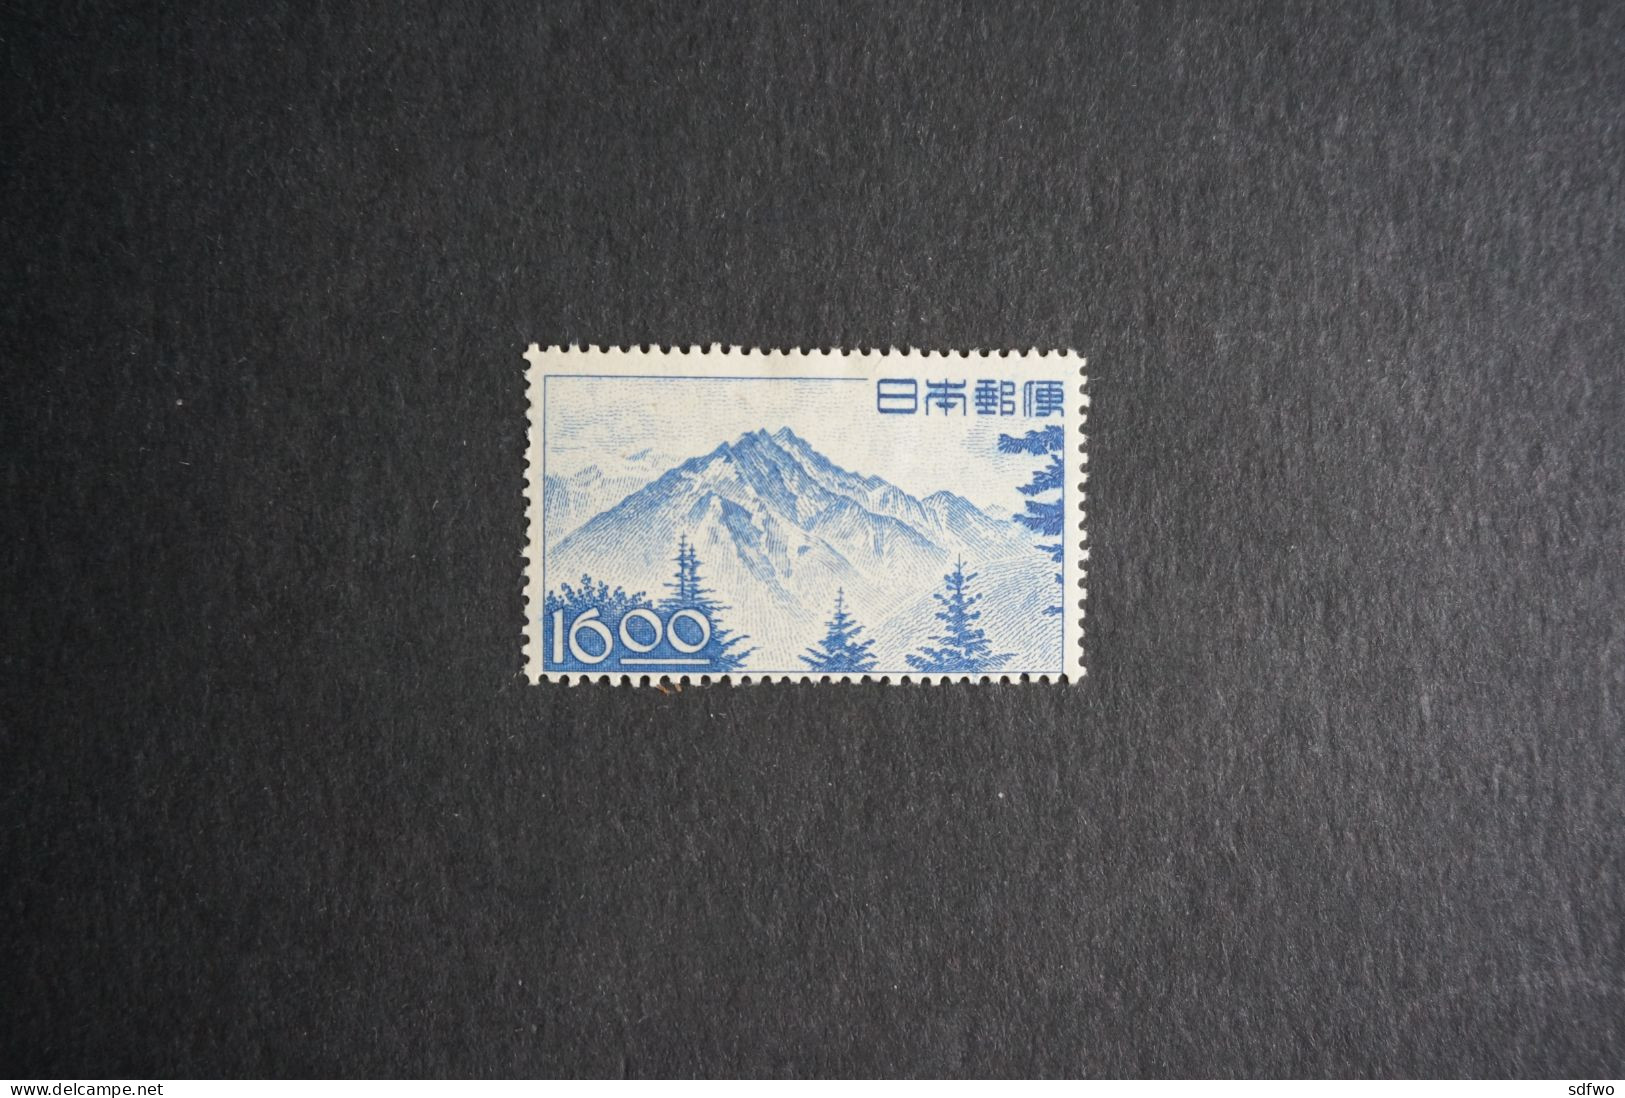 (T5) Japan - 1949 mountain & forest  6y - #C156 (MH)